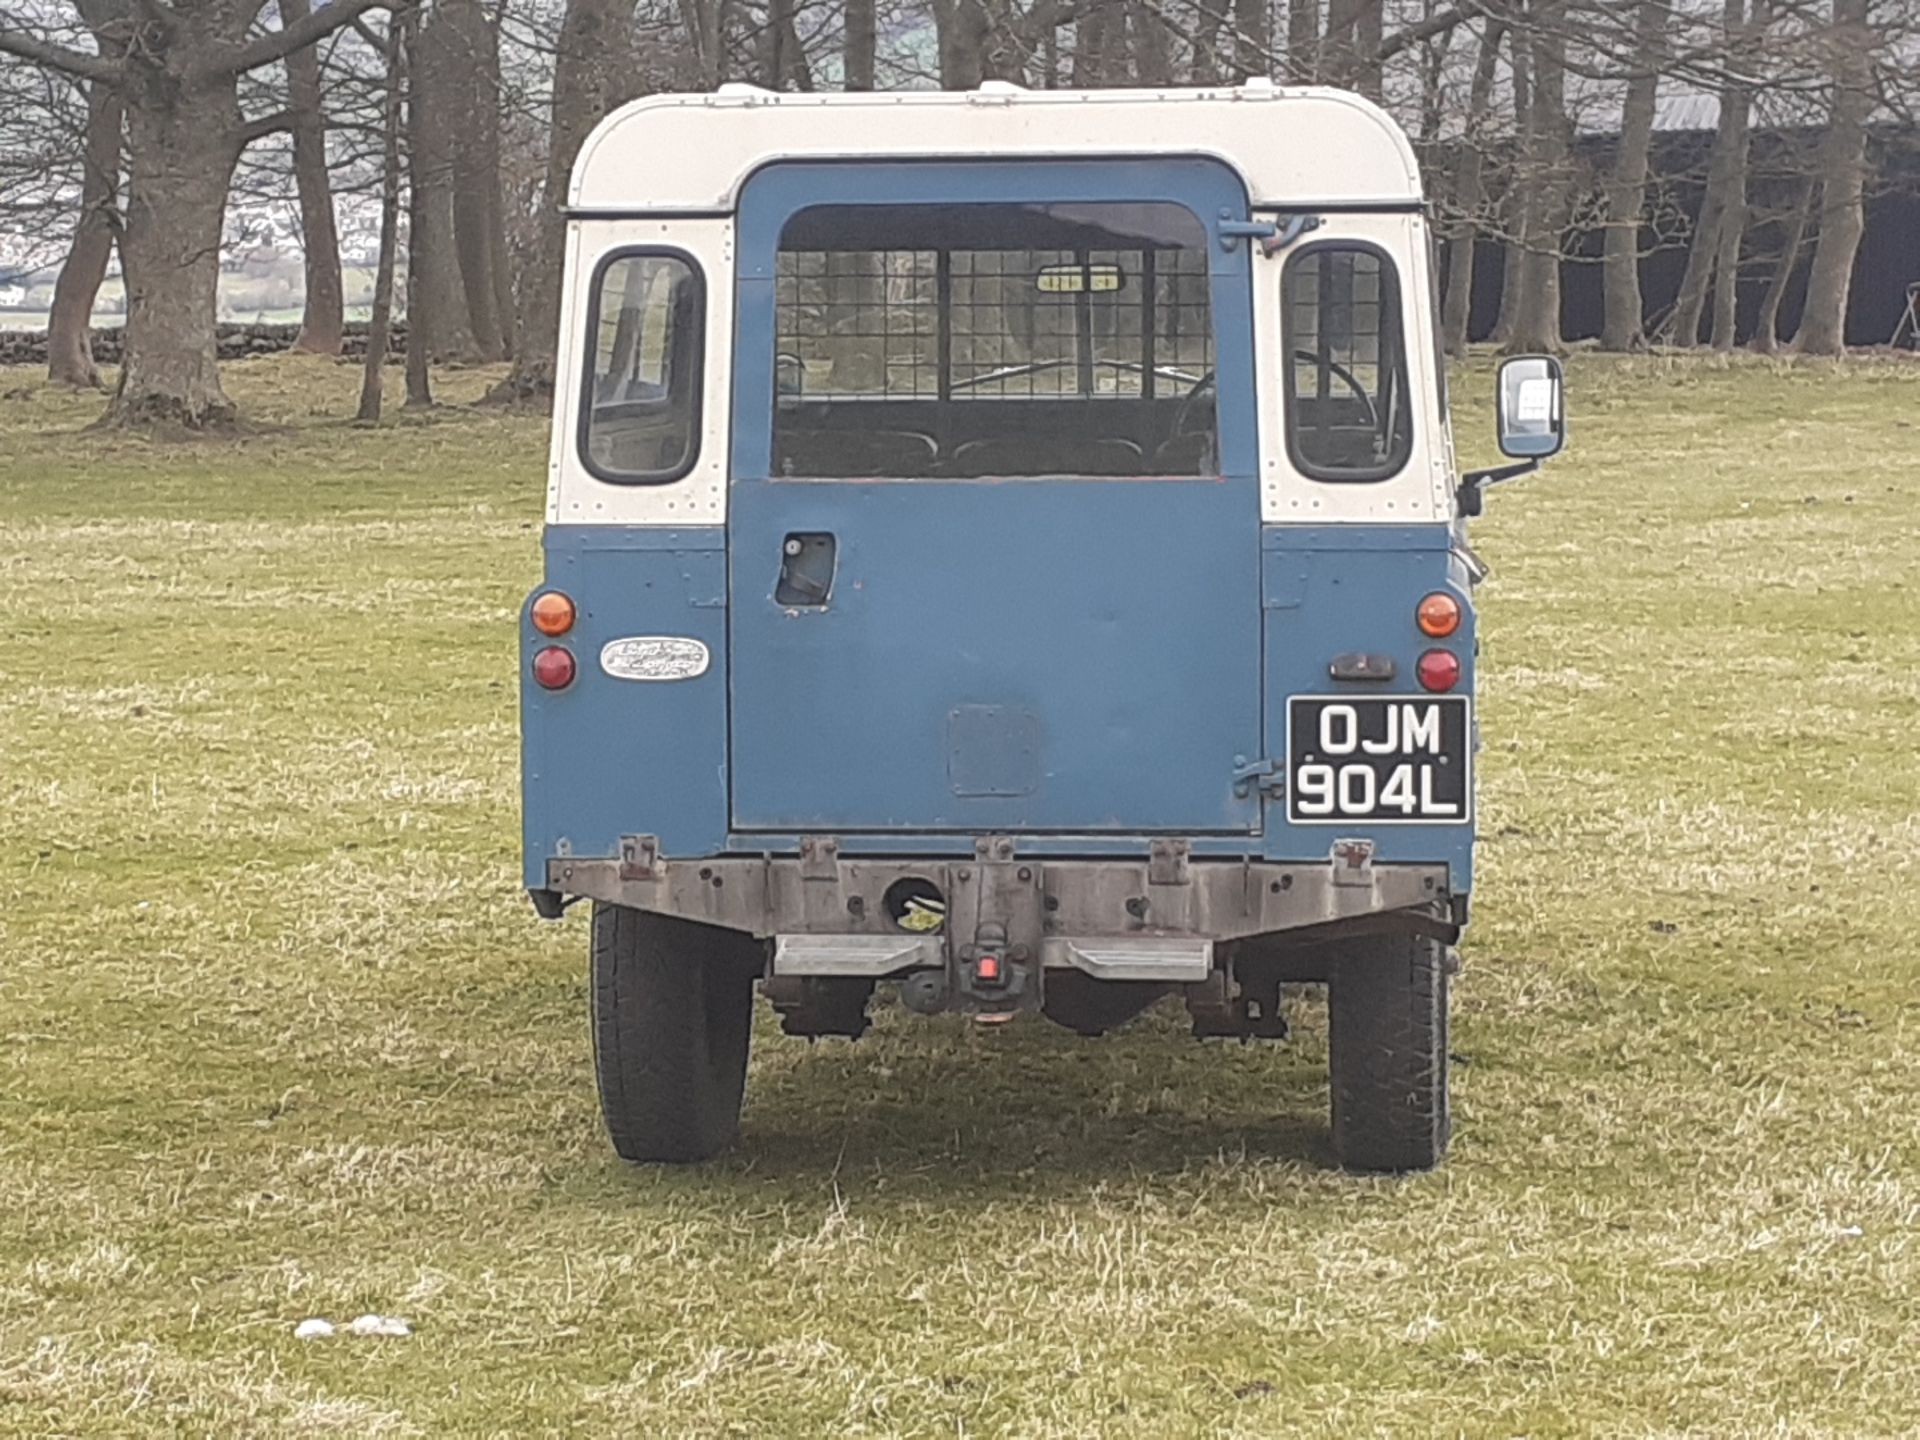 1972 LAND ROVER 88" - 4 CYL 2.5 DIESEL NATURALLY ASPIRATED, DRIVES AS IT SHOULD, WONDERFUL PATINA - Image 7 of 15